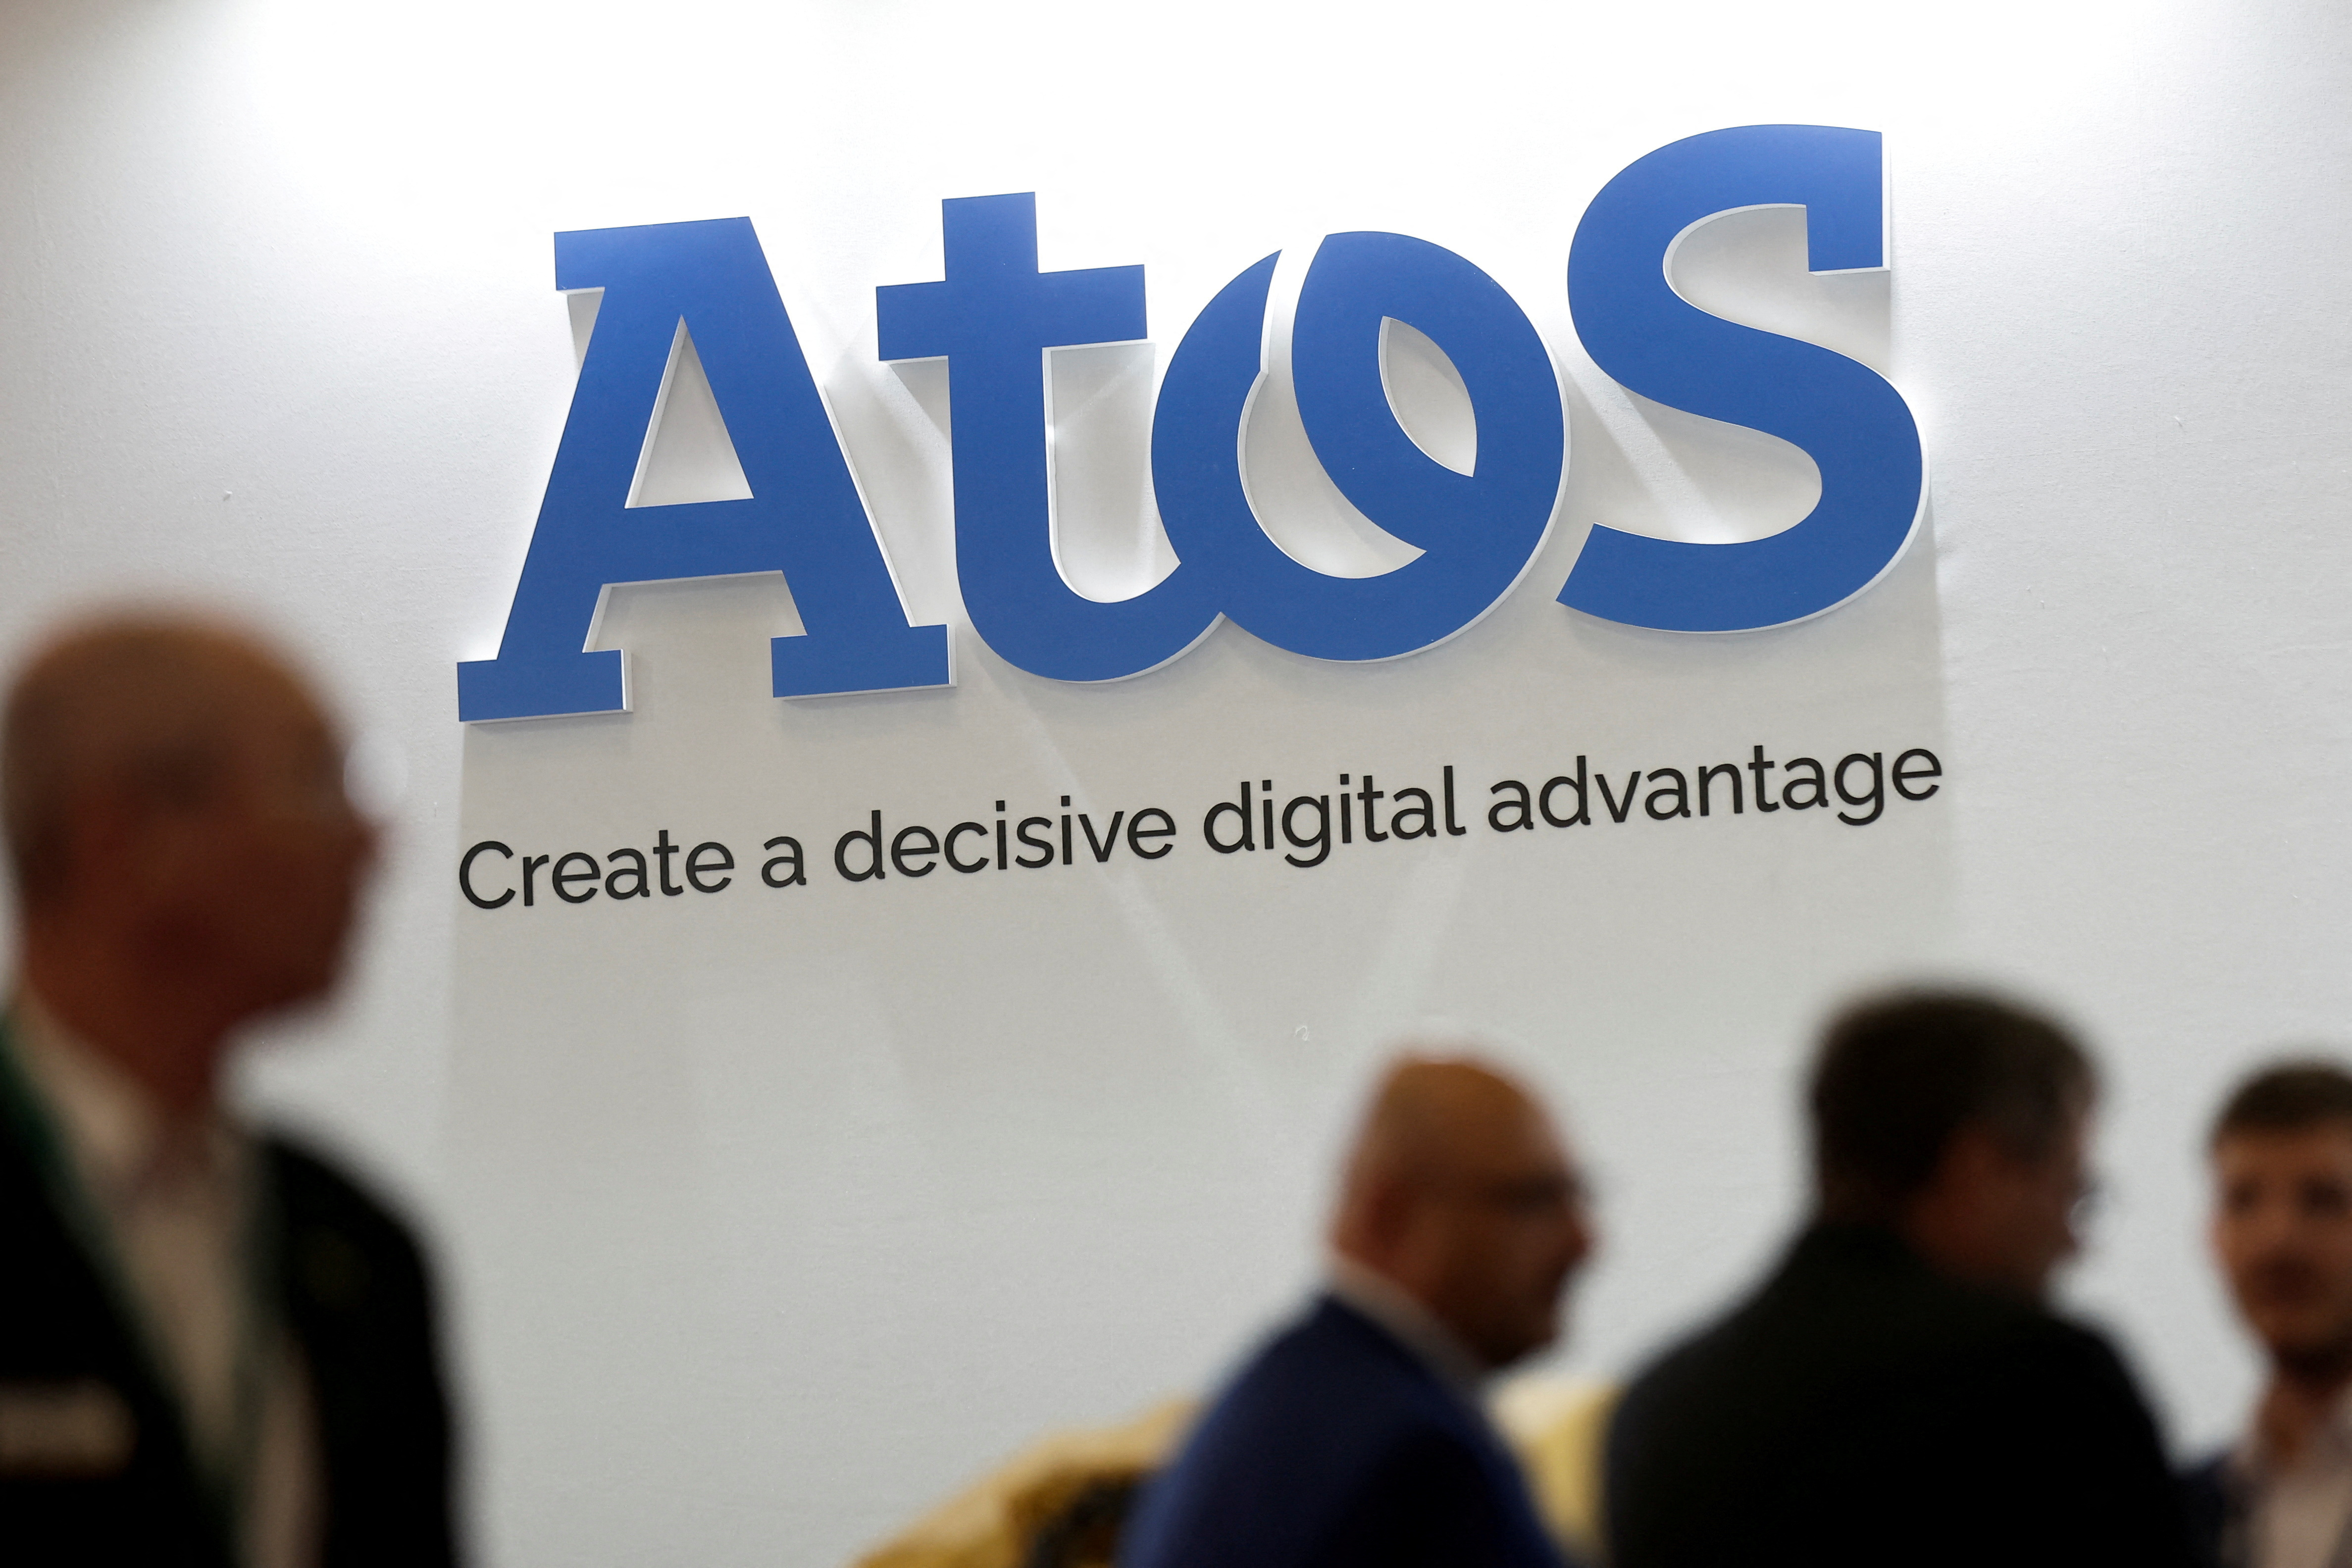 The logo of French IT consulting firm Atos